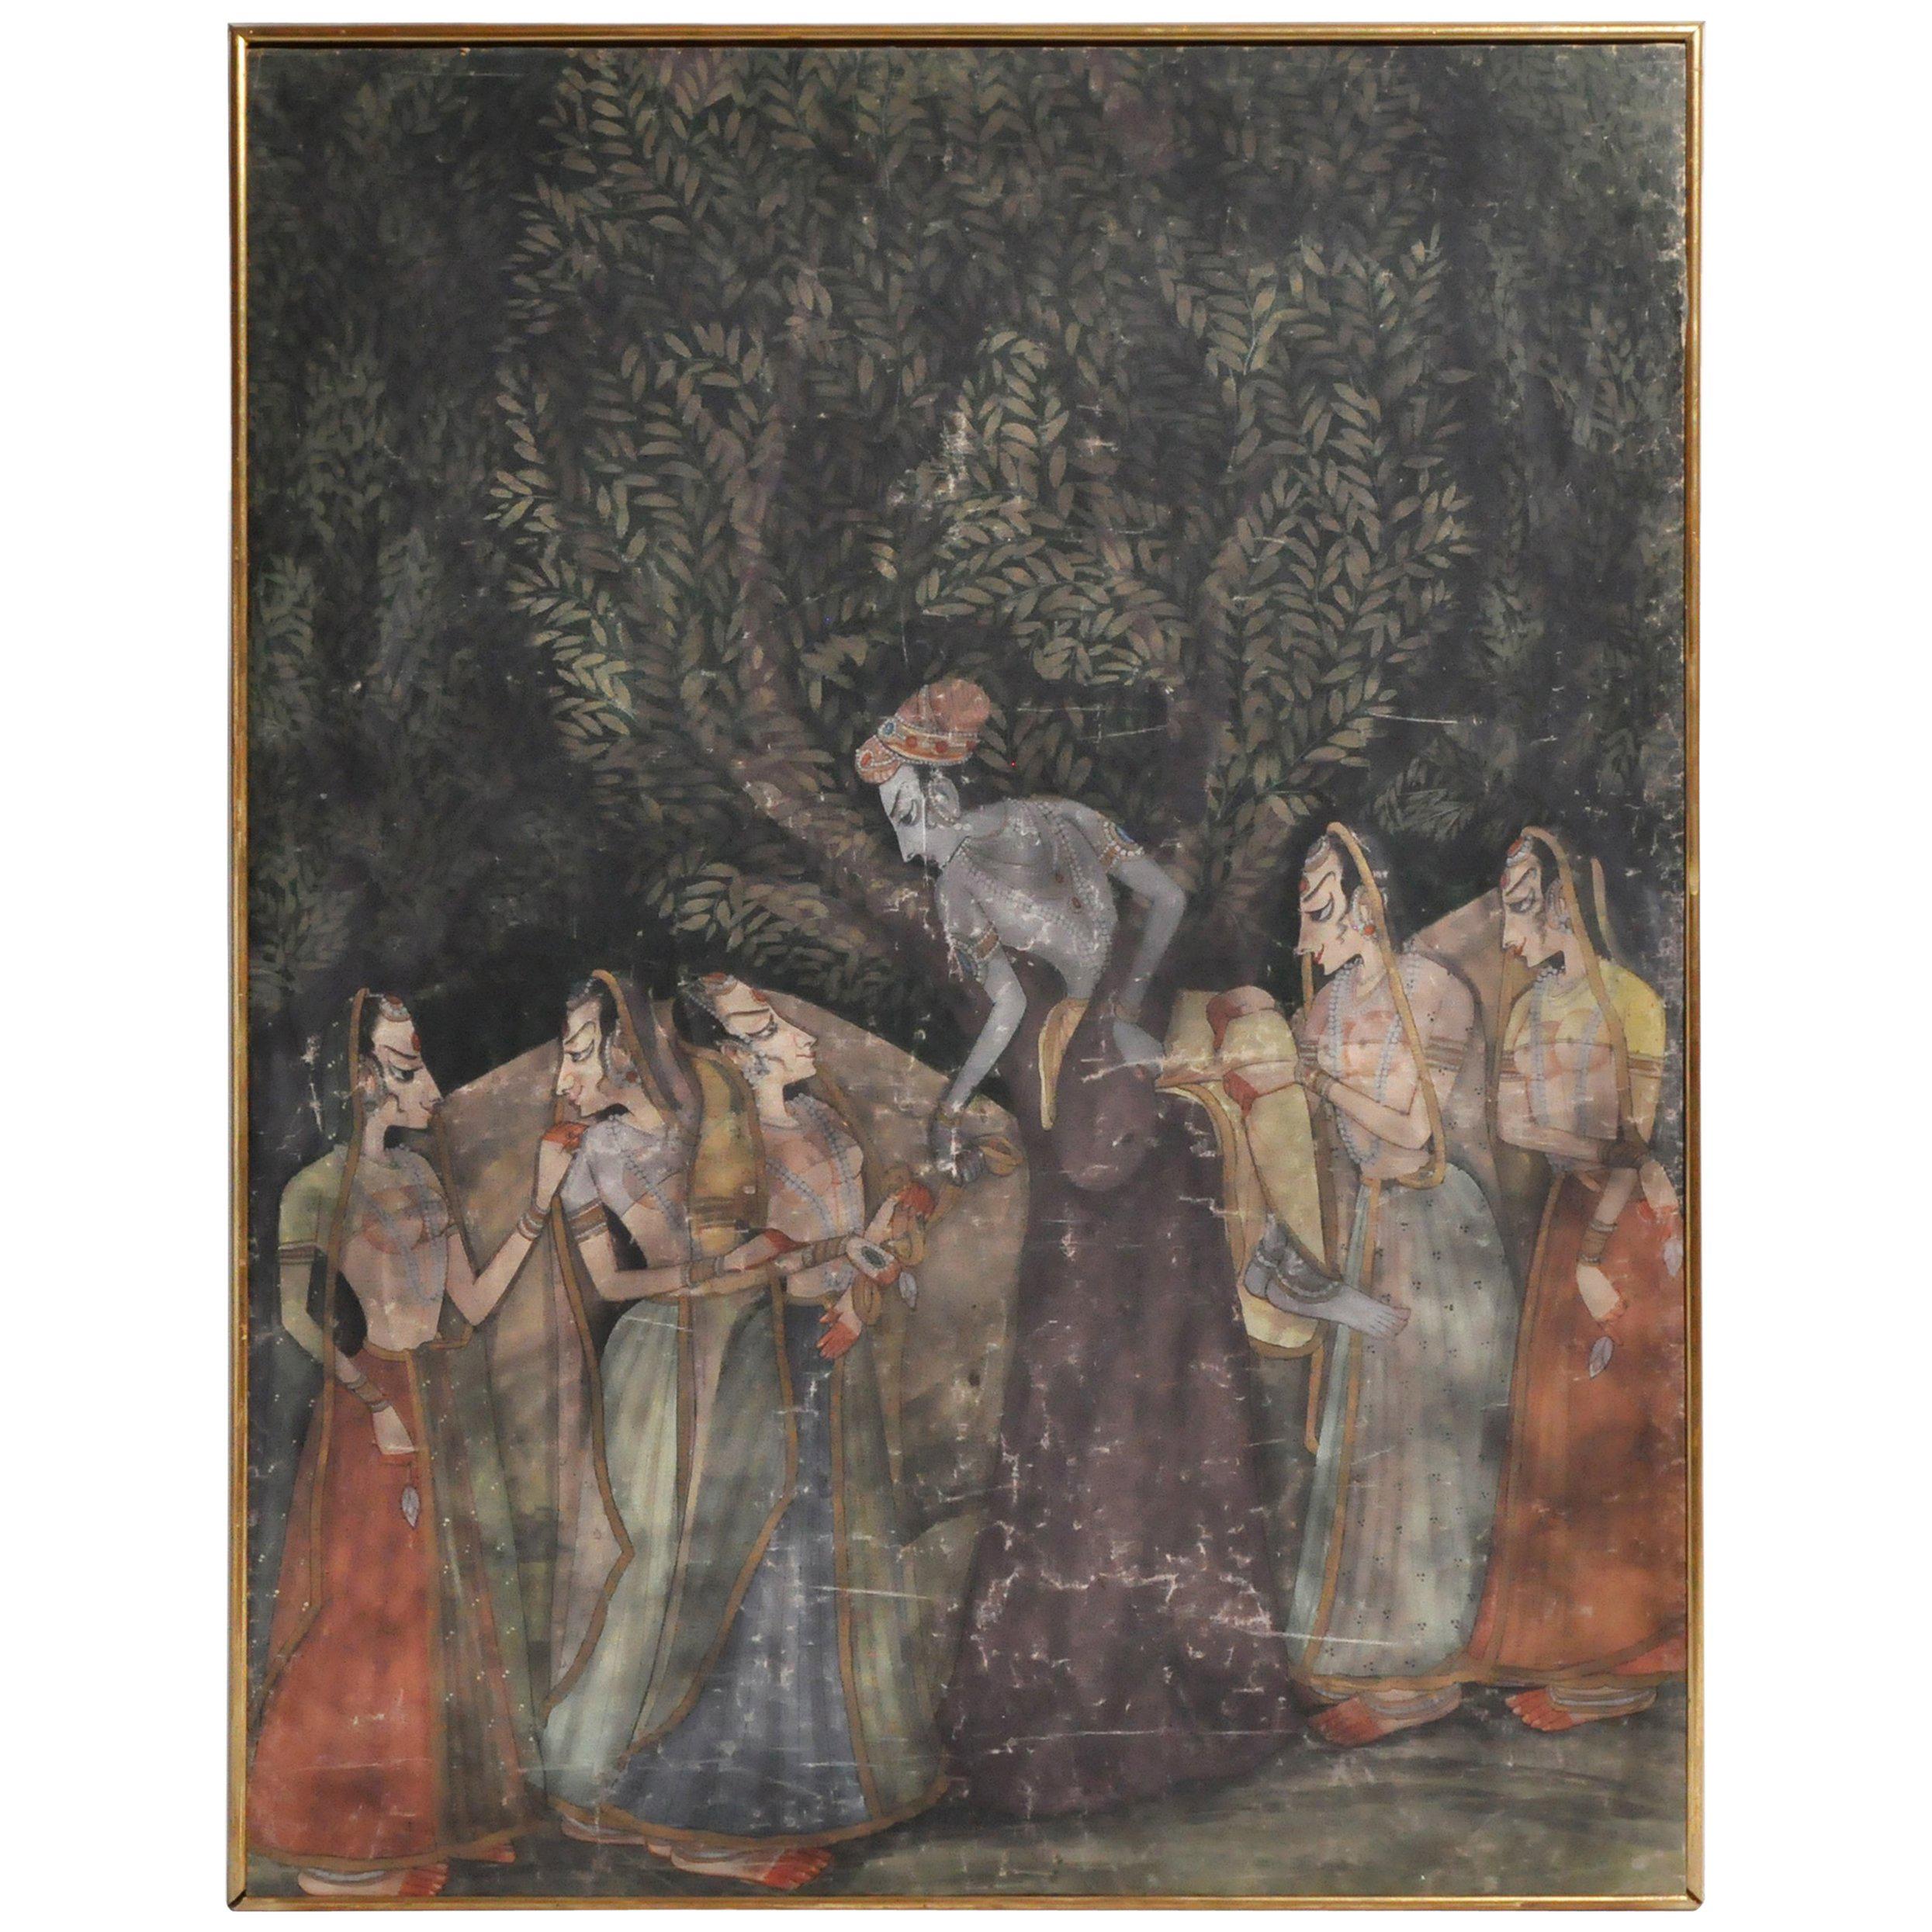 Large Gouache Painting of Krishna with Female Gopis Dancing